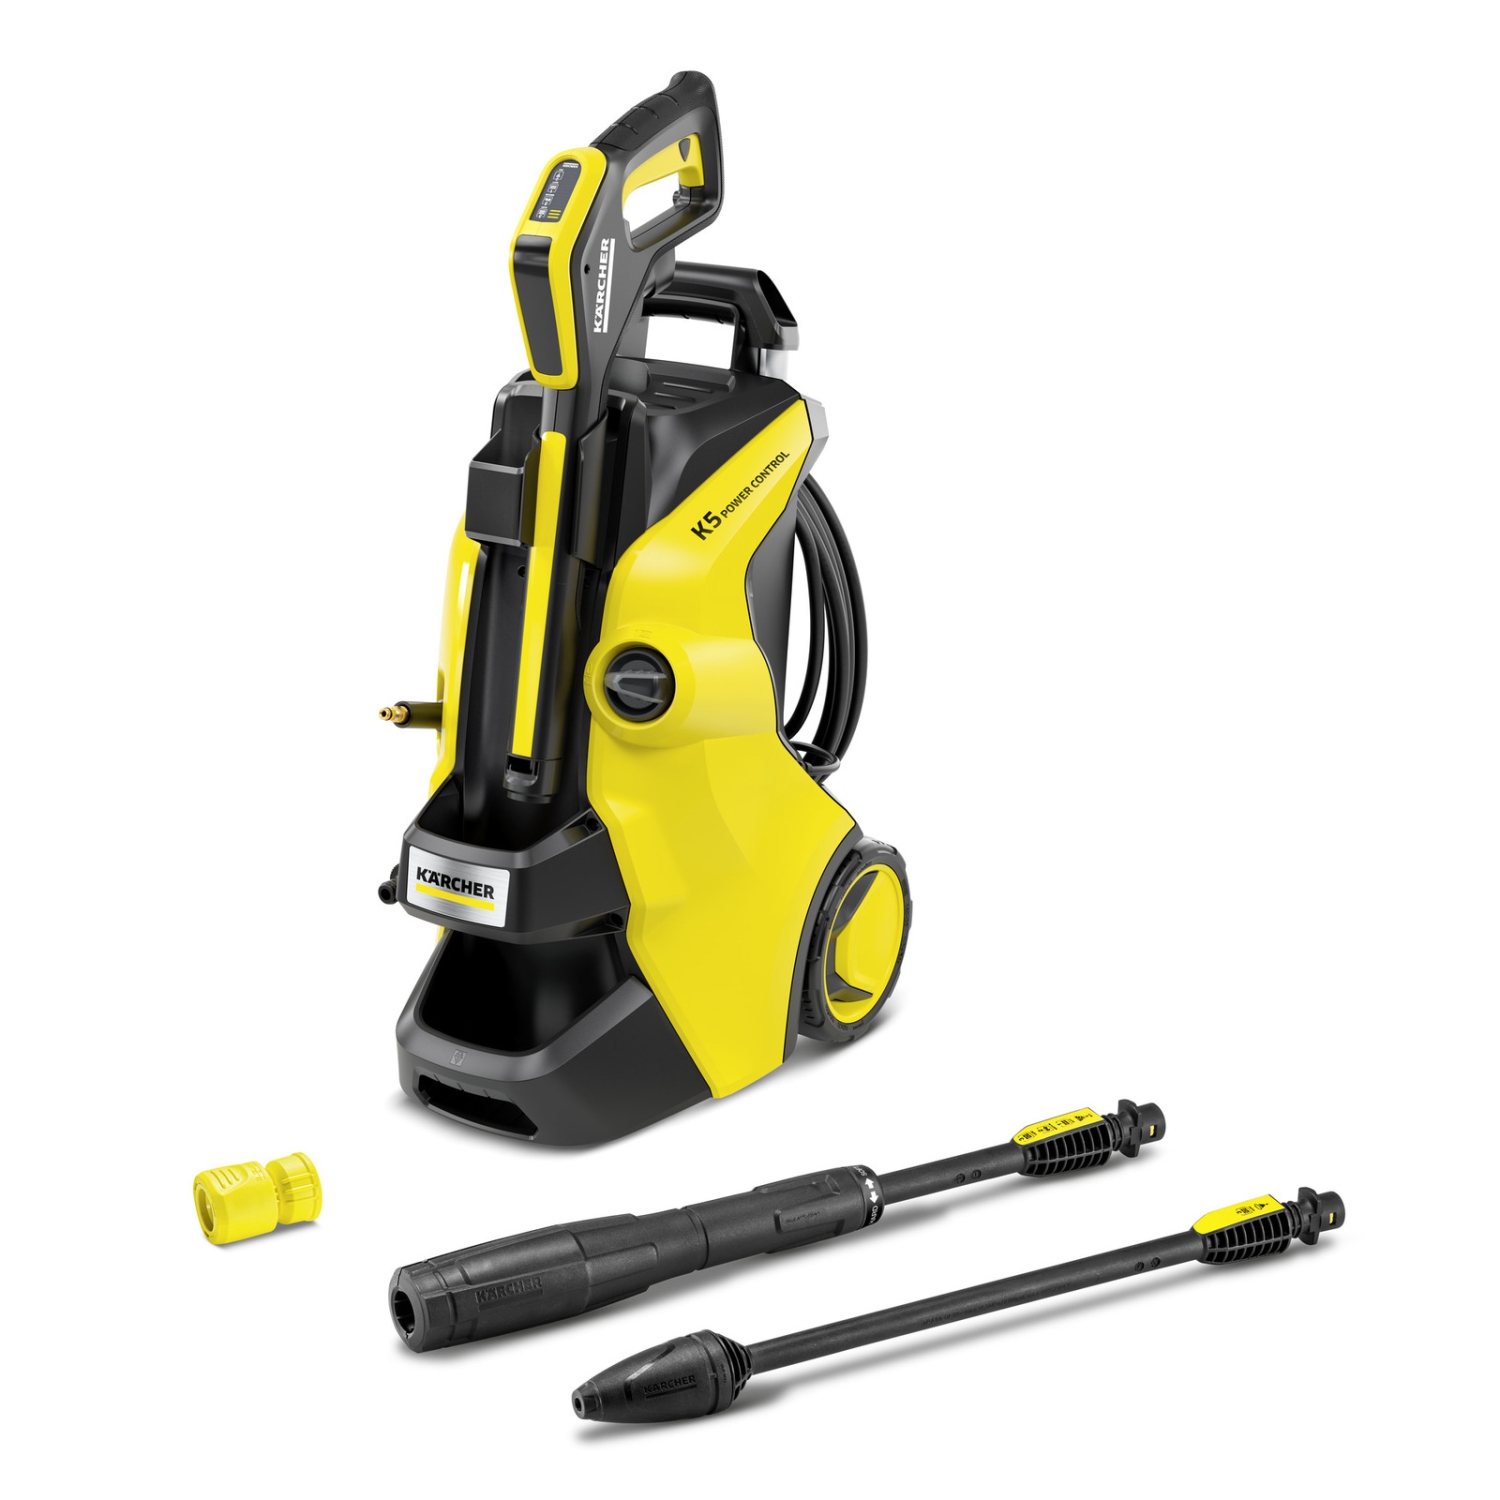 Karcher Electric Pressure Washer K 5 Power Control with 2000 PSI, Karcher App Compatibility and Plug and Clean Detergent System